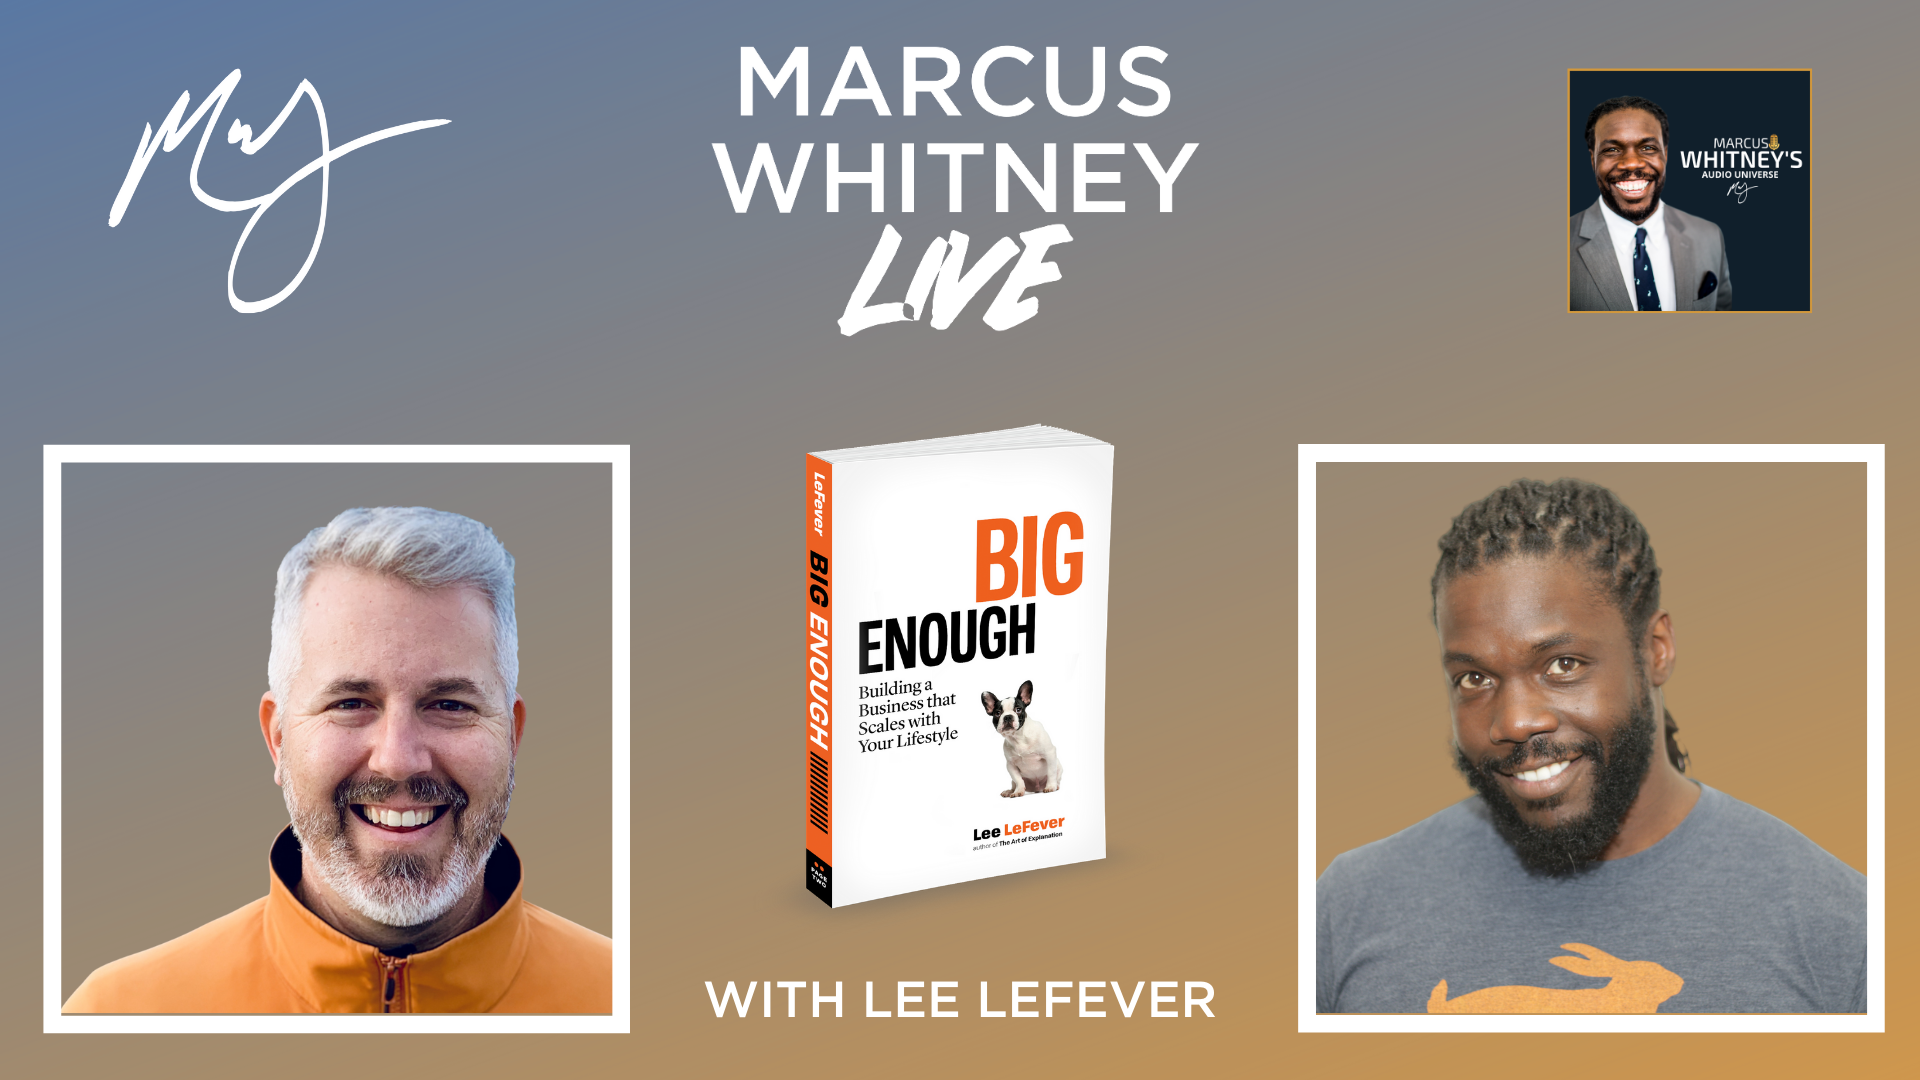 Being Big Enough with Lee LeFever